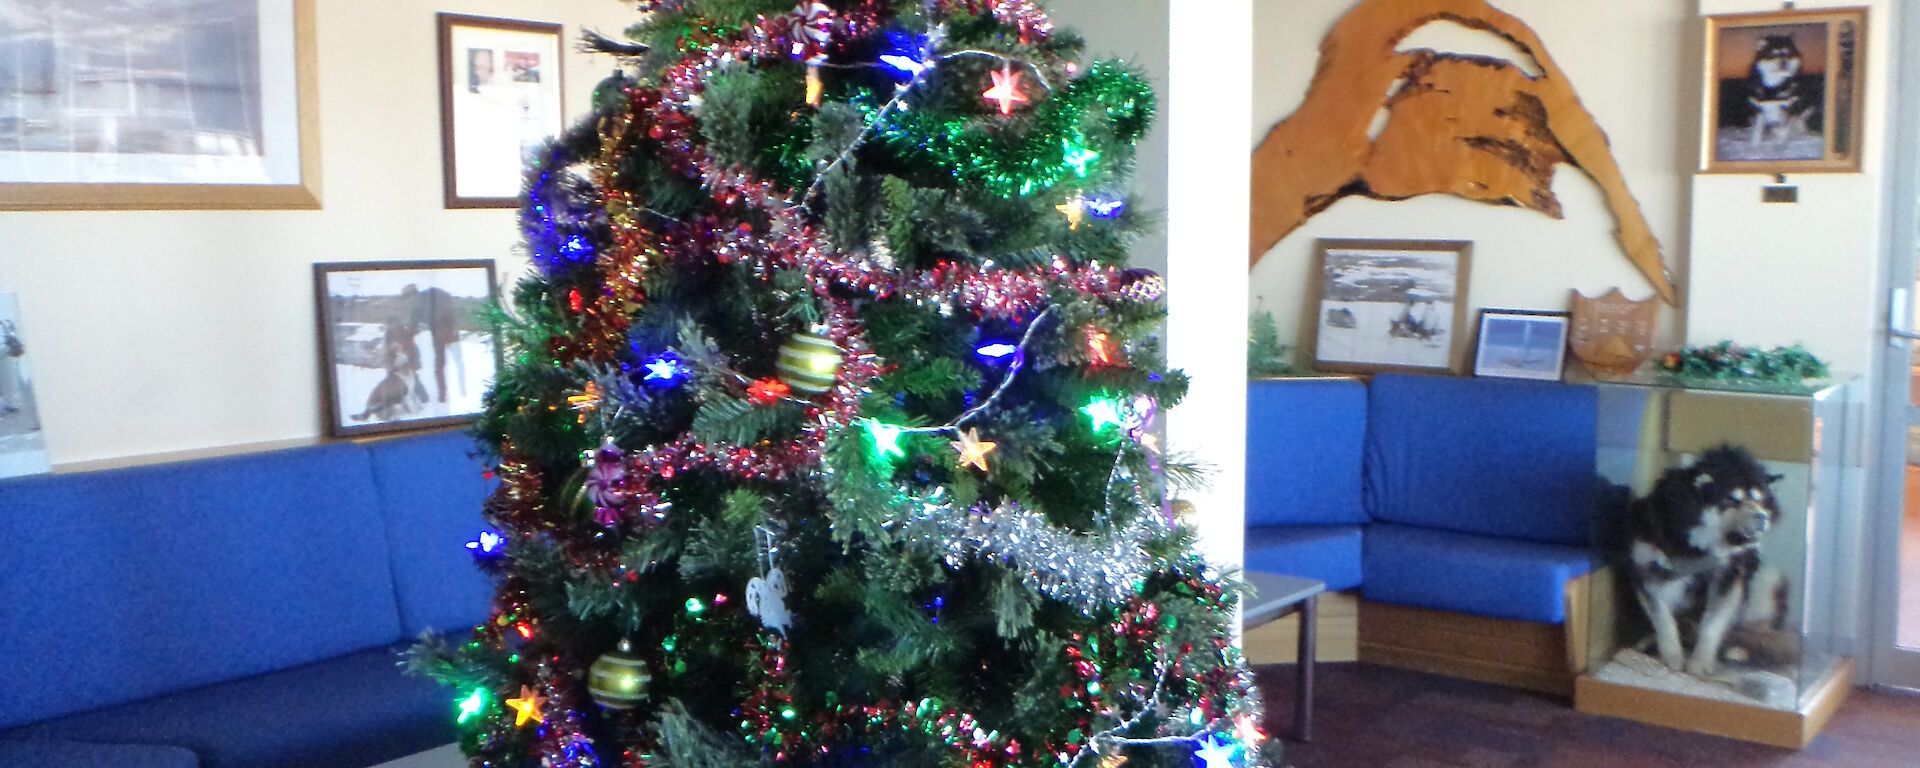 A well decorated Christmas tree in Mawson’s upstairs lounge area